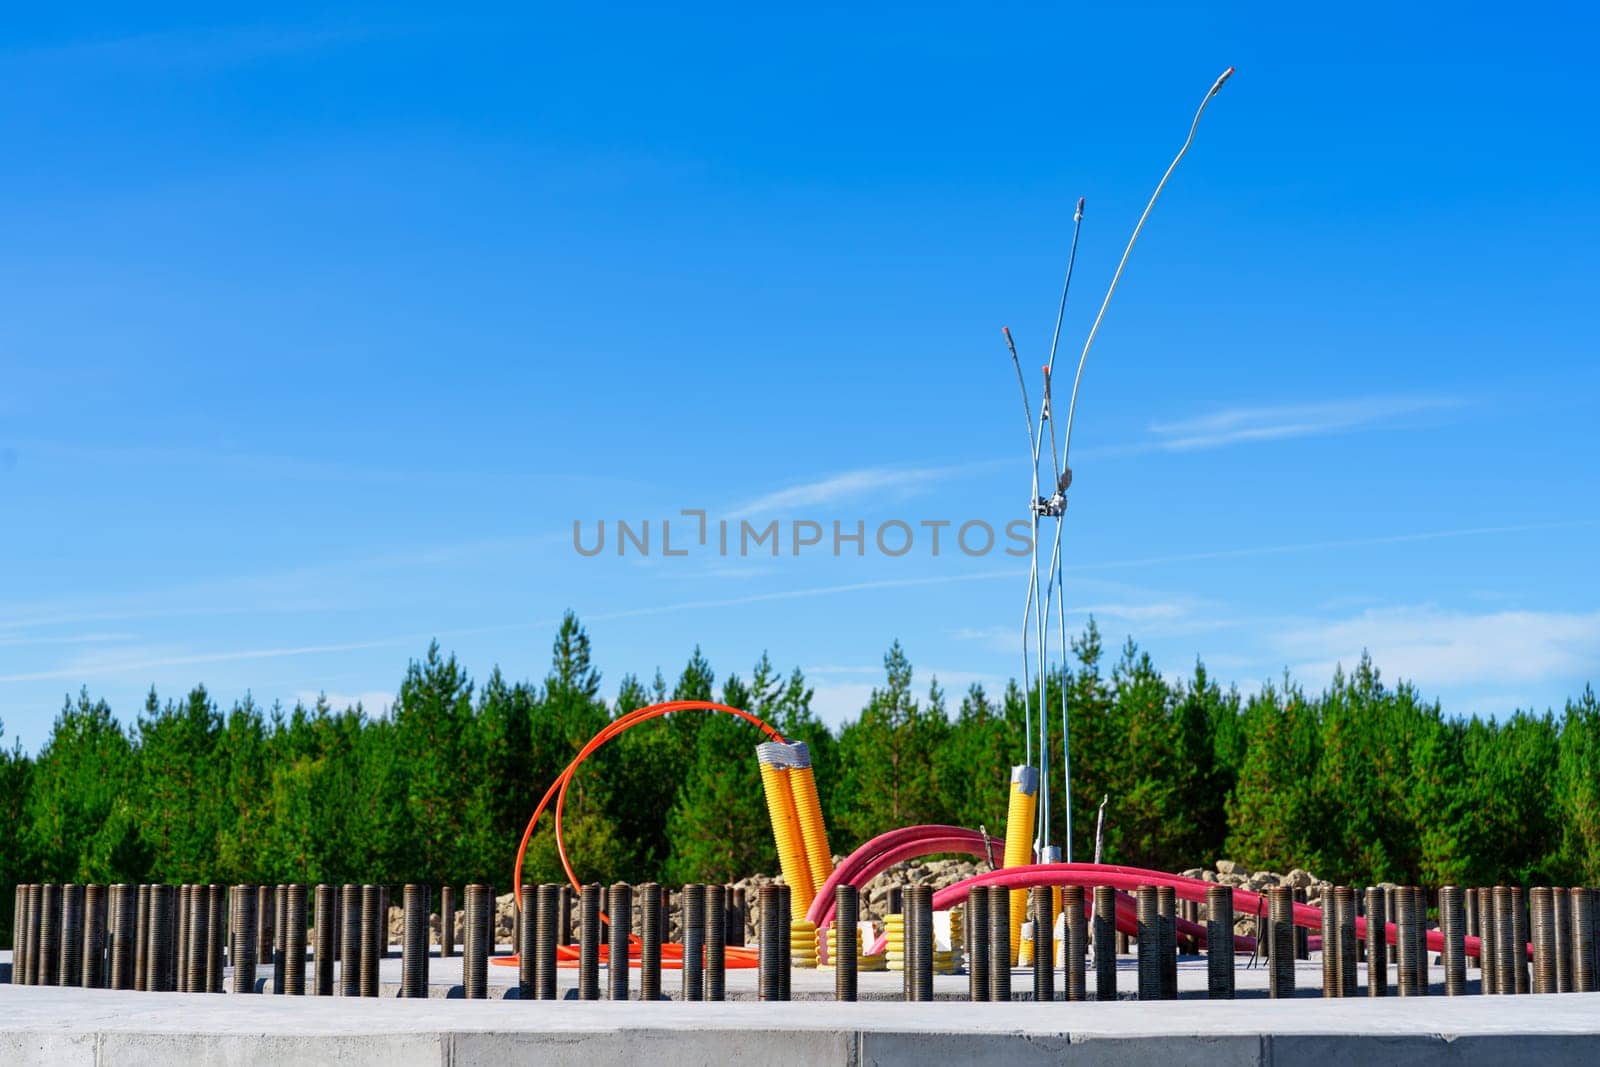 Building Concrete Foundation for Wind Turbine: Developing a Wind Electric Turbine Park by PhotoTime